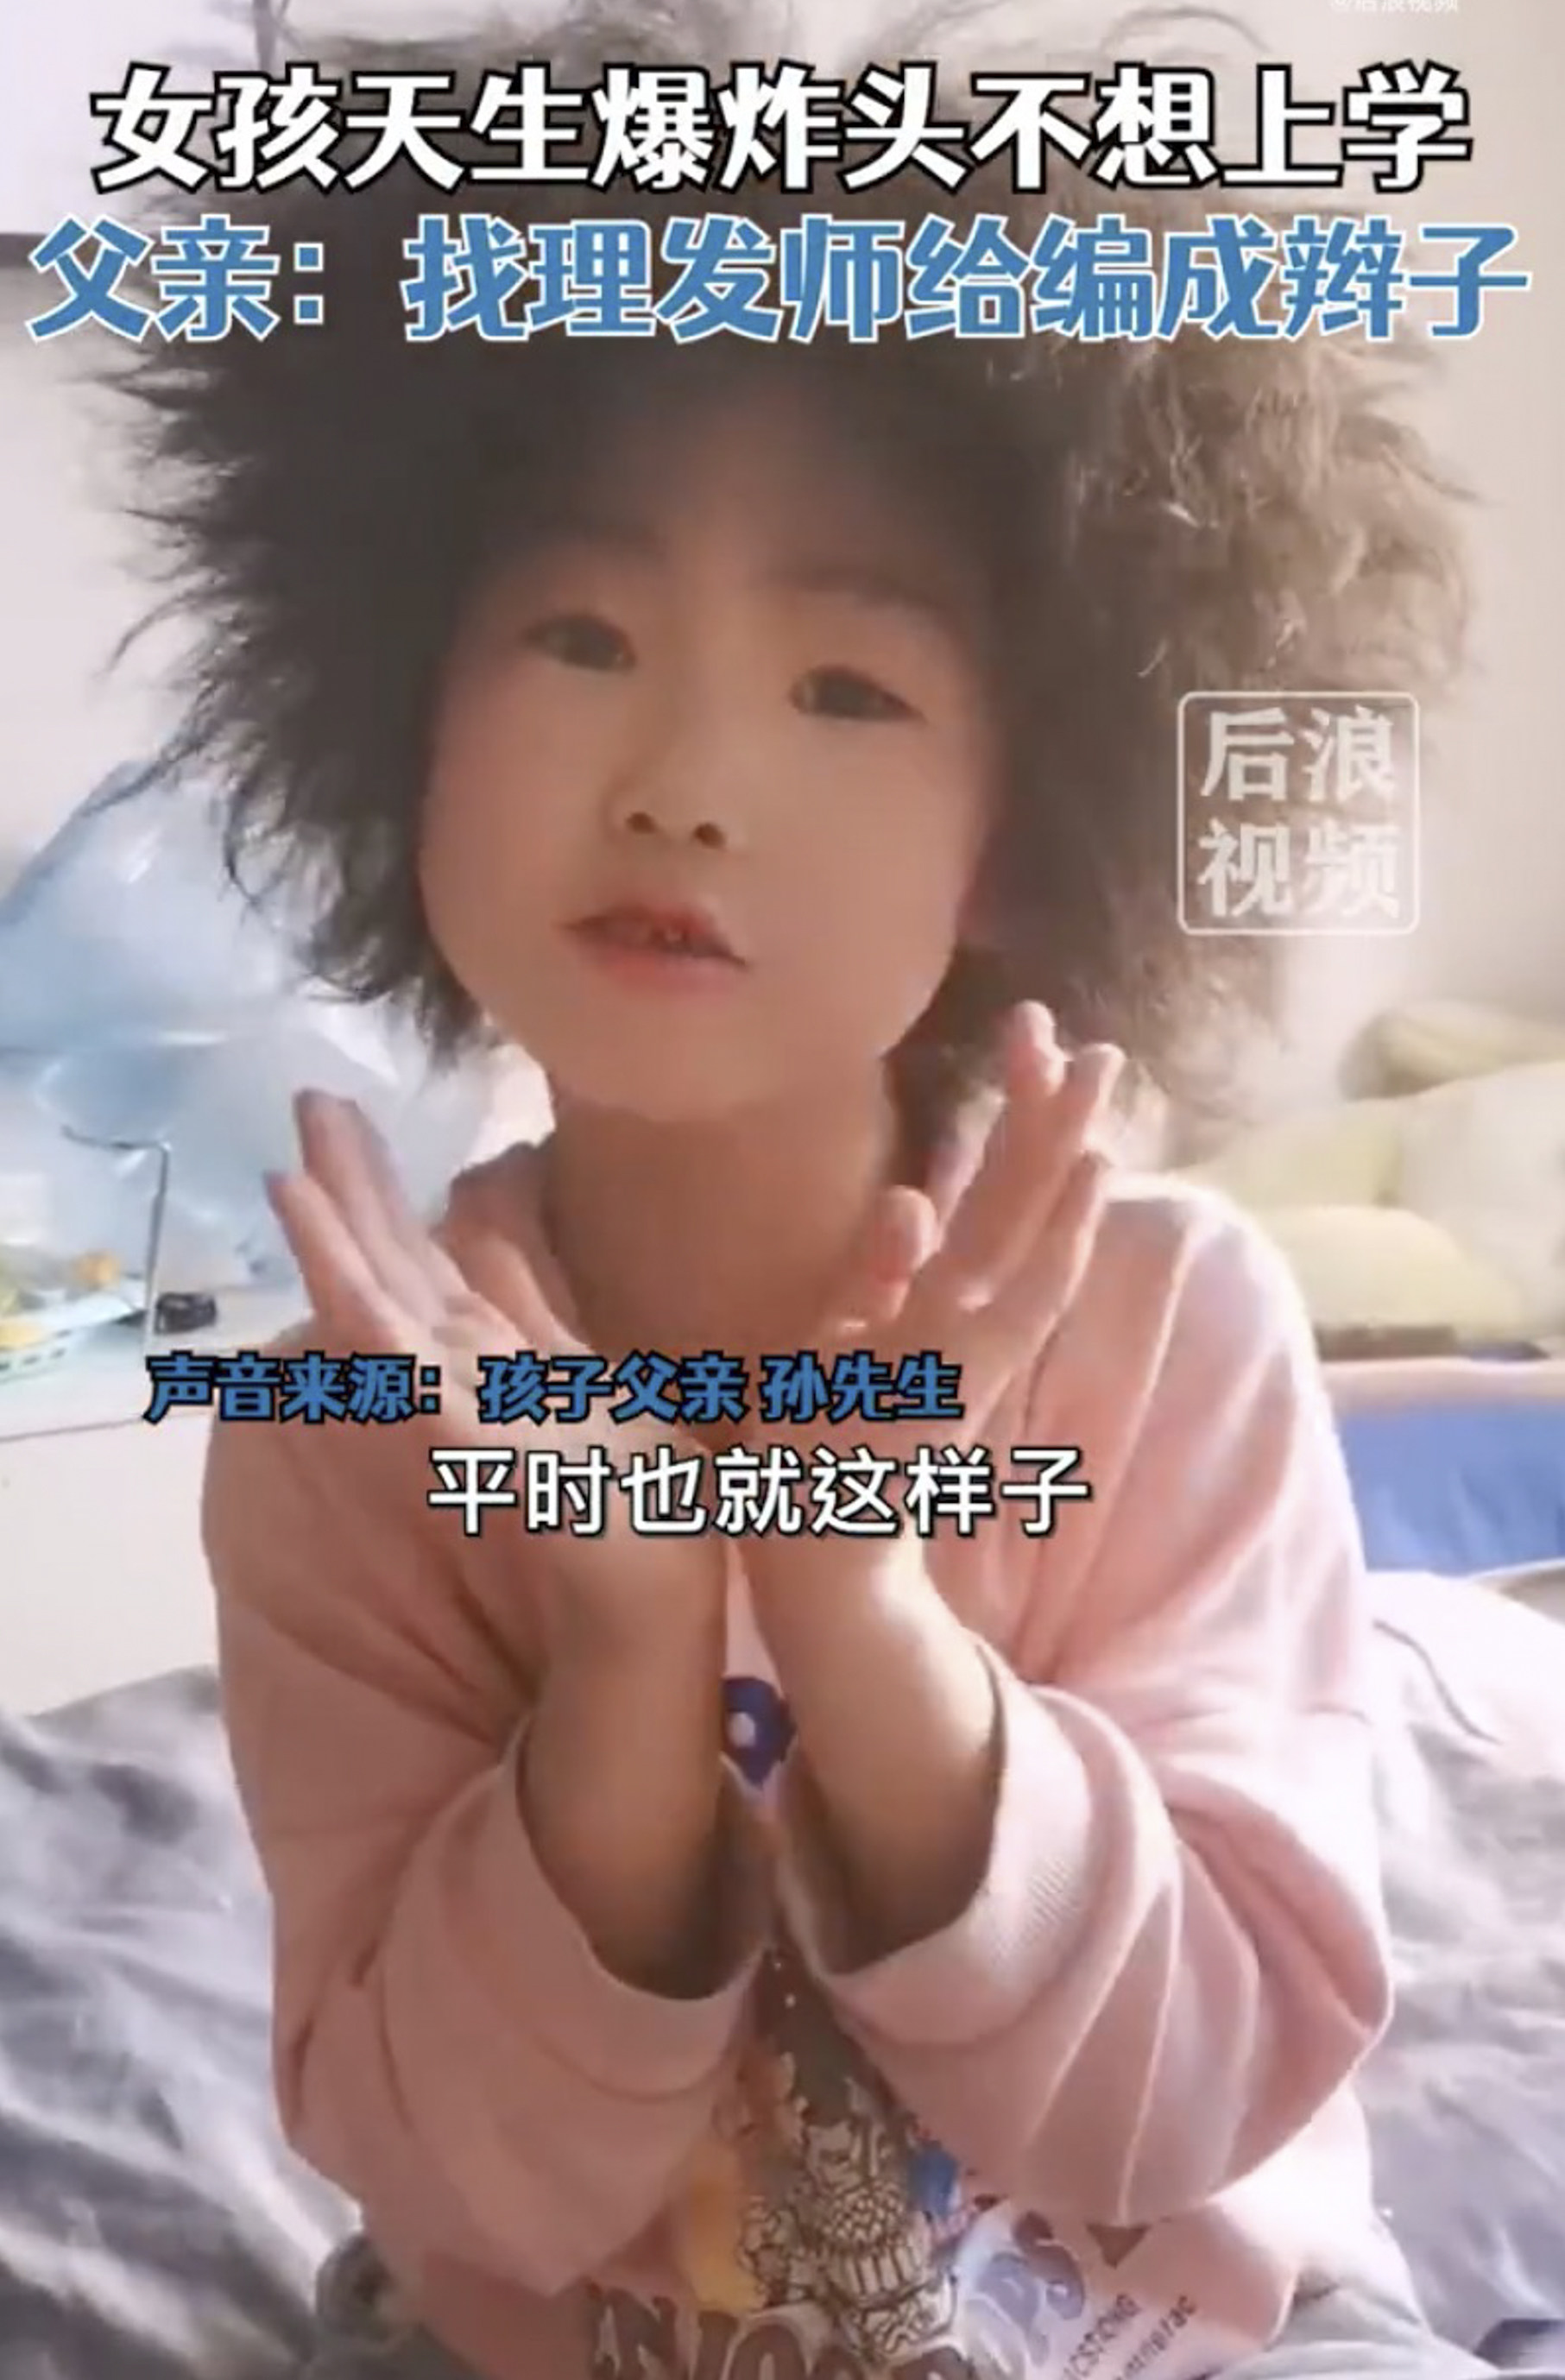 “When I take her out to play, people often come to ask whether my daughter’s hair is curled or if she is wearing a wig,” says her mother. Photo: Weibo